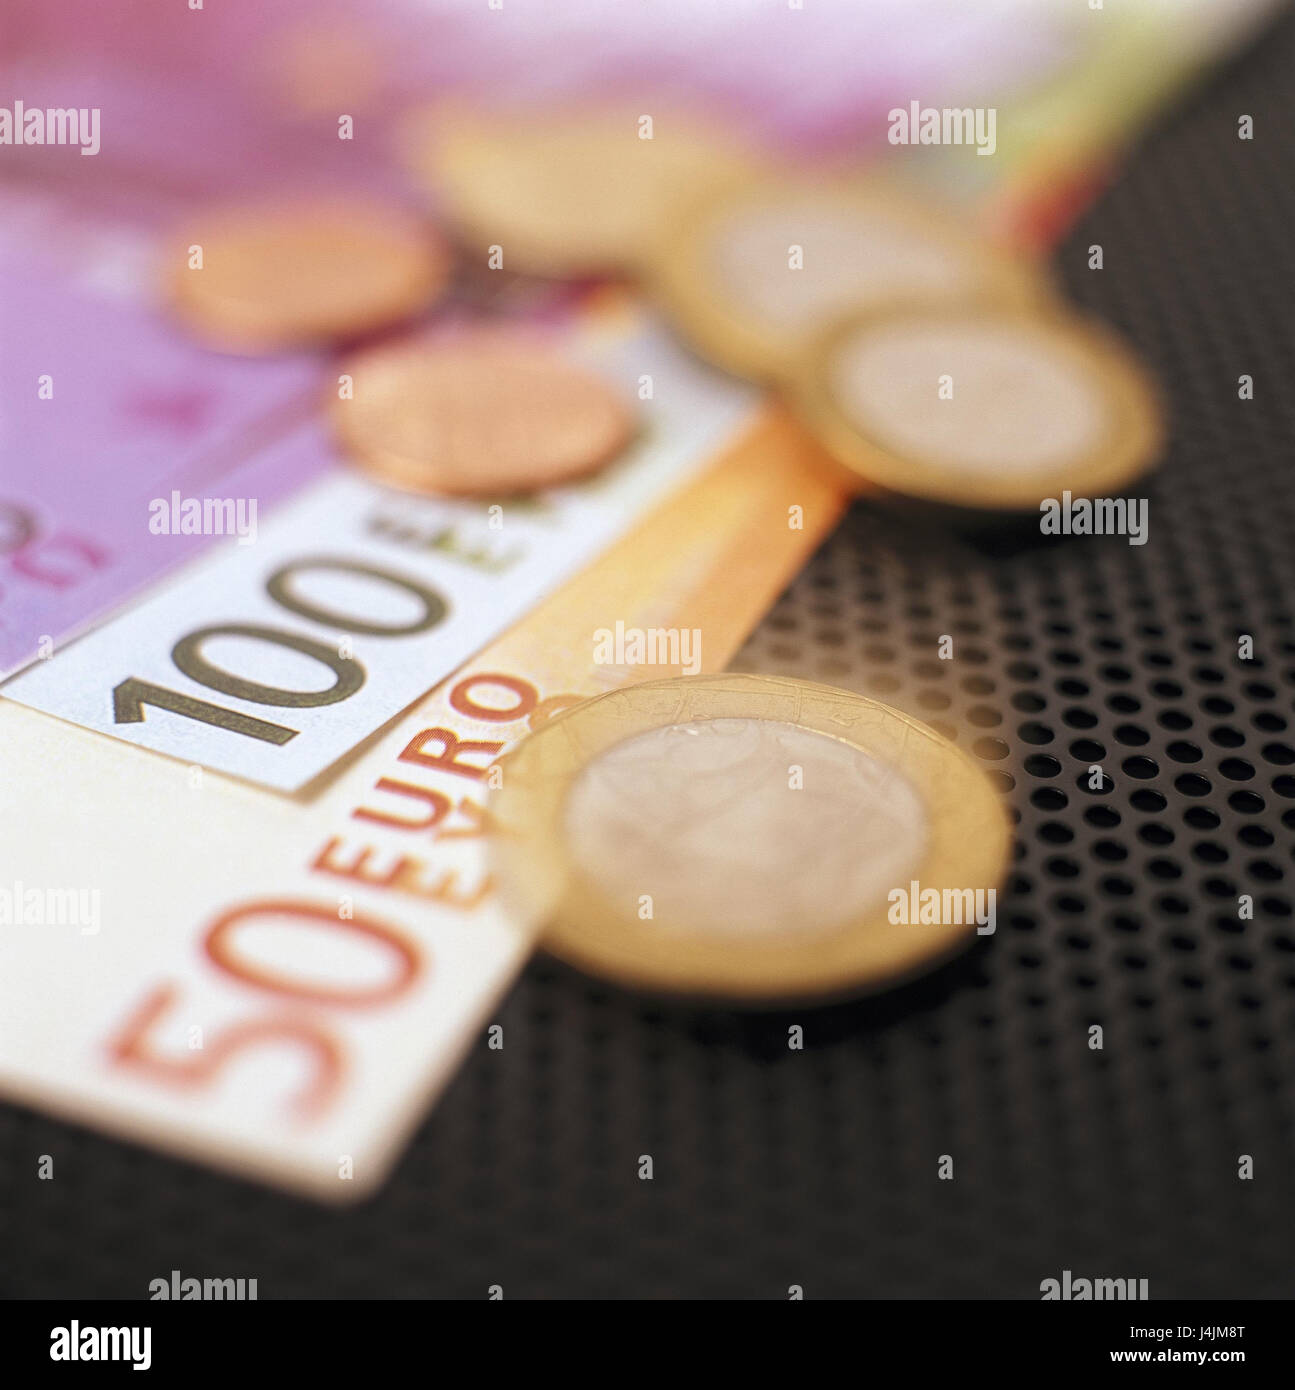 EWWU, WWU, the EU, European monetary union, money, currency, single currency, currency unit, common currency, Europe, banknotes, euro coins, eurocent, blur, cash, cash, detail, blur makes unfamiliar bank notes, coins, euro, Stock Photo